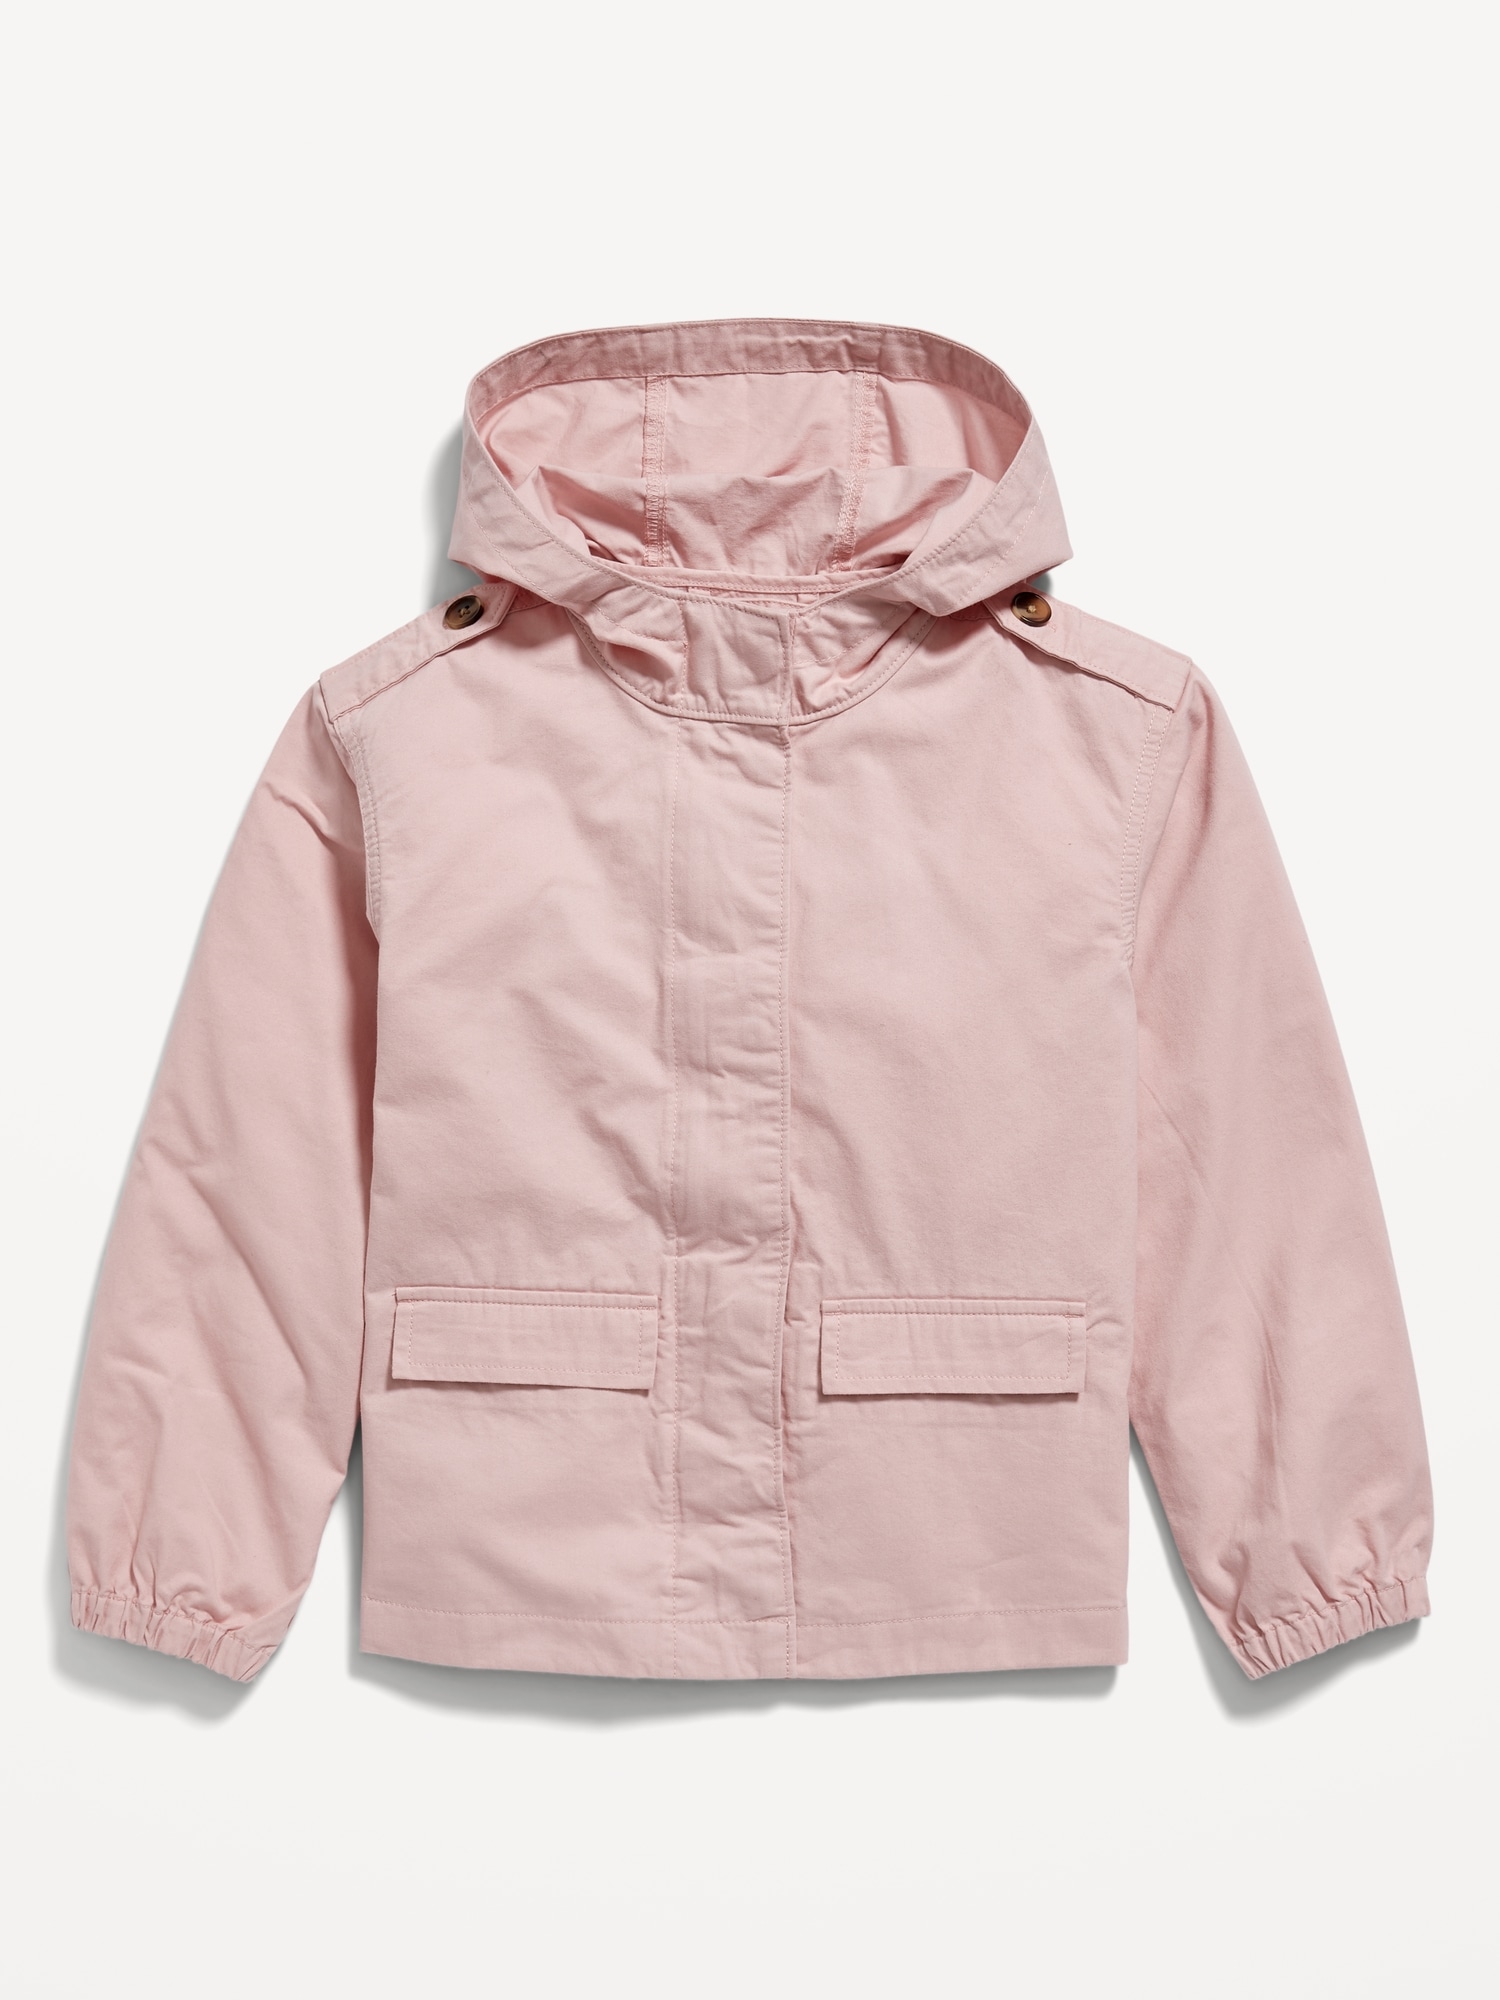 Old Navy Hooded Twill Utility Jacket for Girls pink. 1